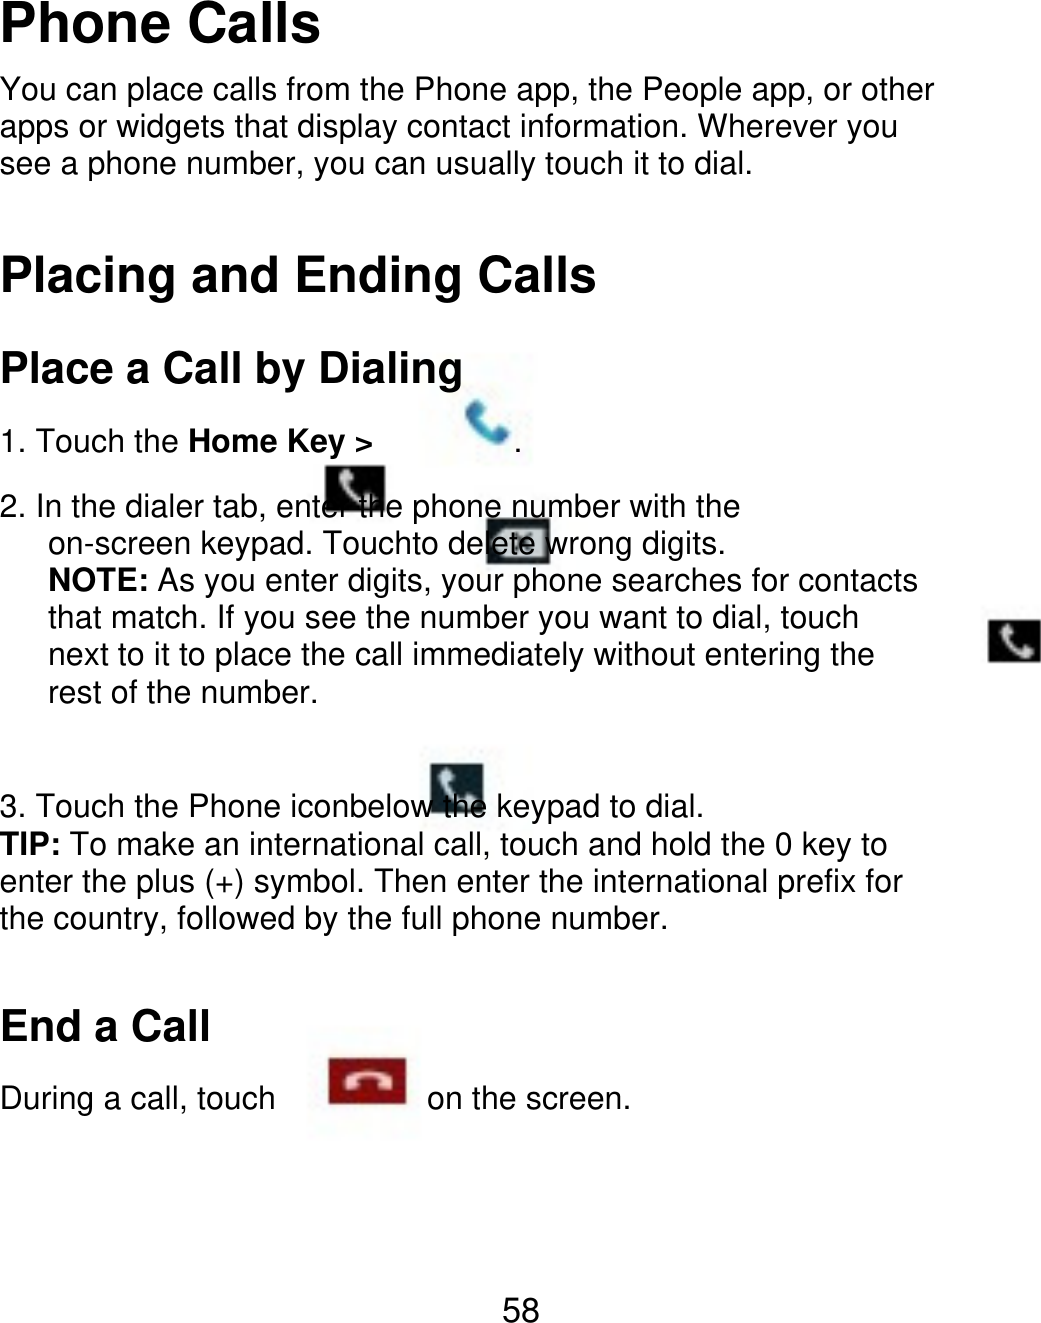 Phone Calls You can place calls from the Phone app, the People app, or other apps or widgets that display contact information. Wherever you see a phone number, you can usually touch it to dial. Placing and Ending Calls Place a Call by Dialing 1. Touch the Home Key &gt; . 2. In the dialer tab, enter the phone number with the       on-screen keypad. Touchto delete wrong digits.    NOTE: As you enter digits, your phone searches for contacts       that match. If you see the number you want to dial, touch       next to it to place the call immediately without entering the    rest of the number. 3. Touch the Phone iconbelow the keypad to dial. TIP: To make an international call, touch and hold the 0 key to enter the plus (+) symbol. Then enter the international prefix for the country, followed by the full phone number. End a Call During a call, touch on the screen. 58 